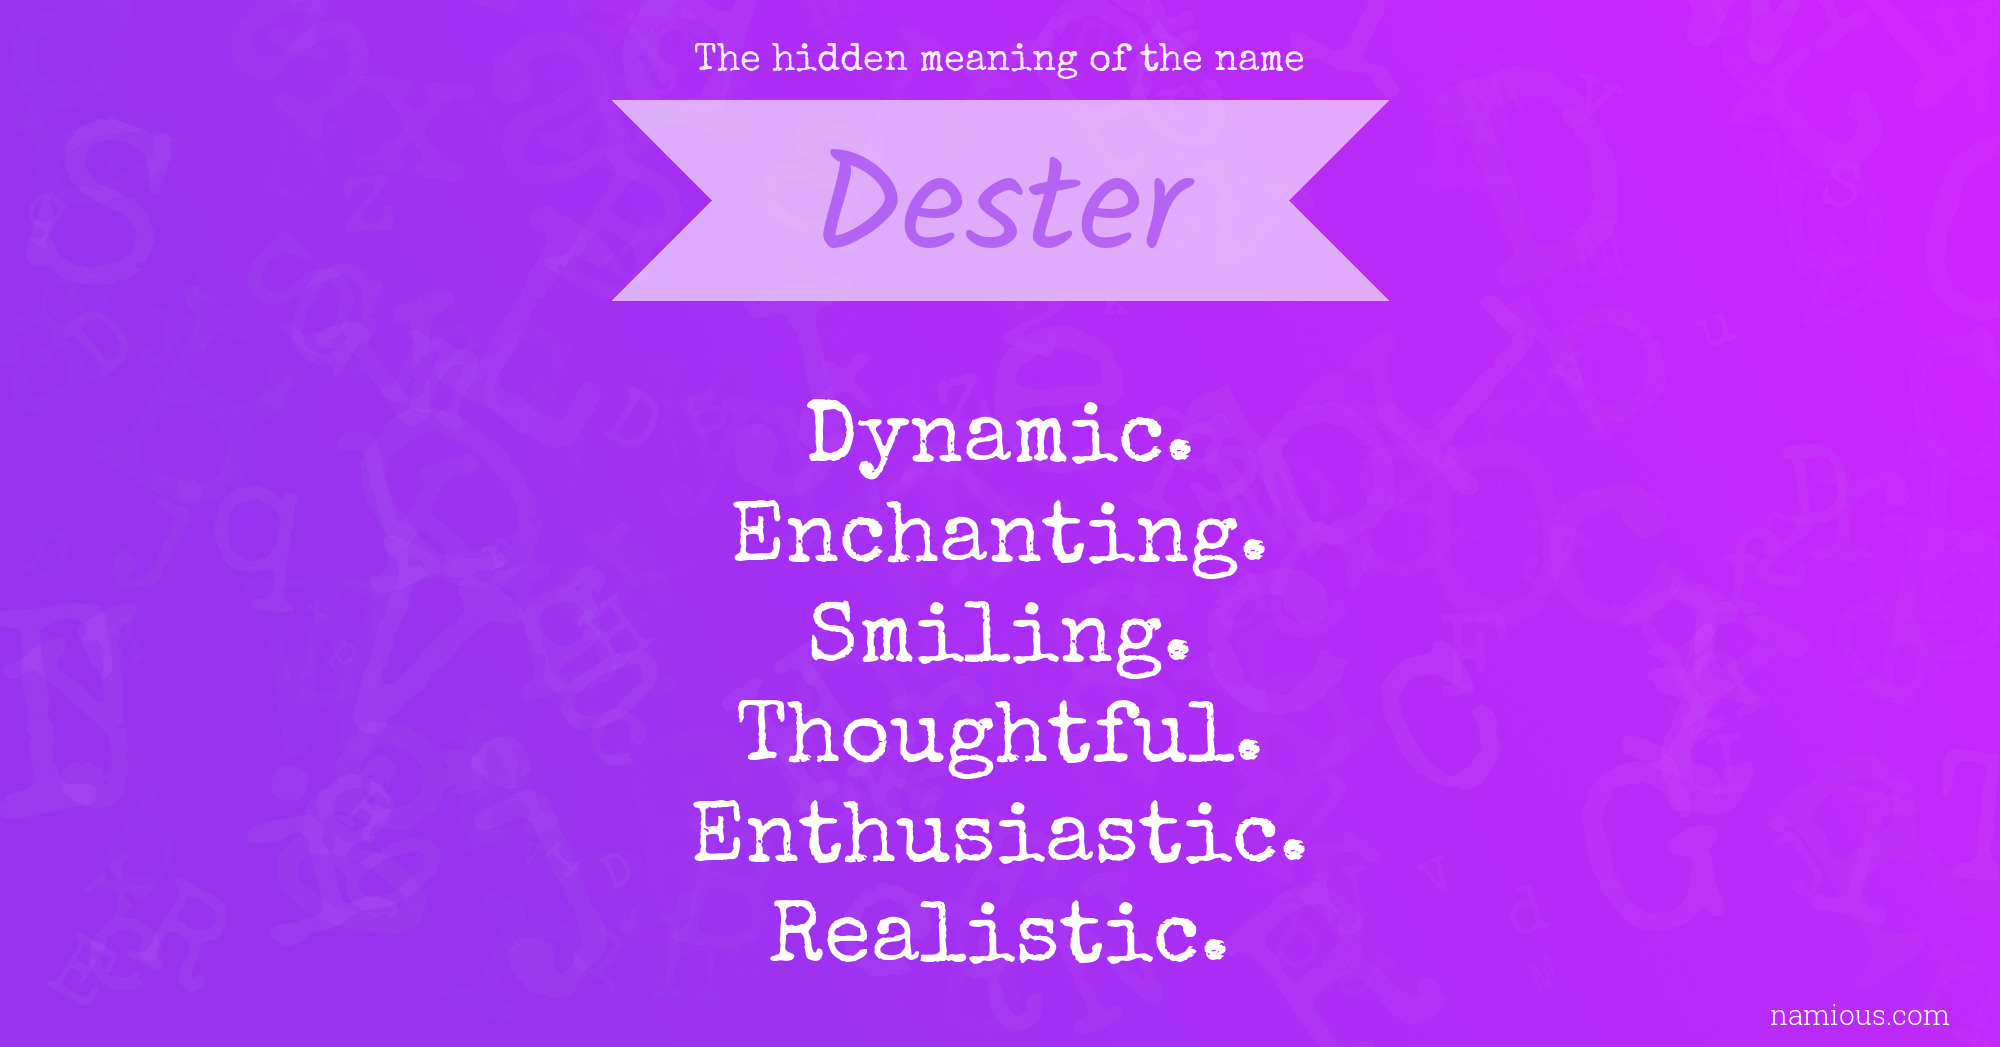 The hidden meaning of the name Dester